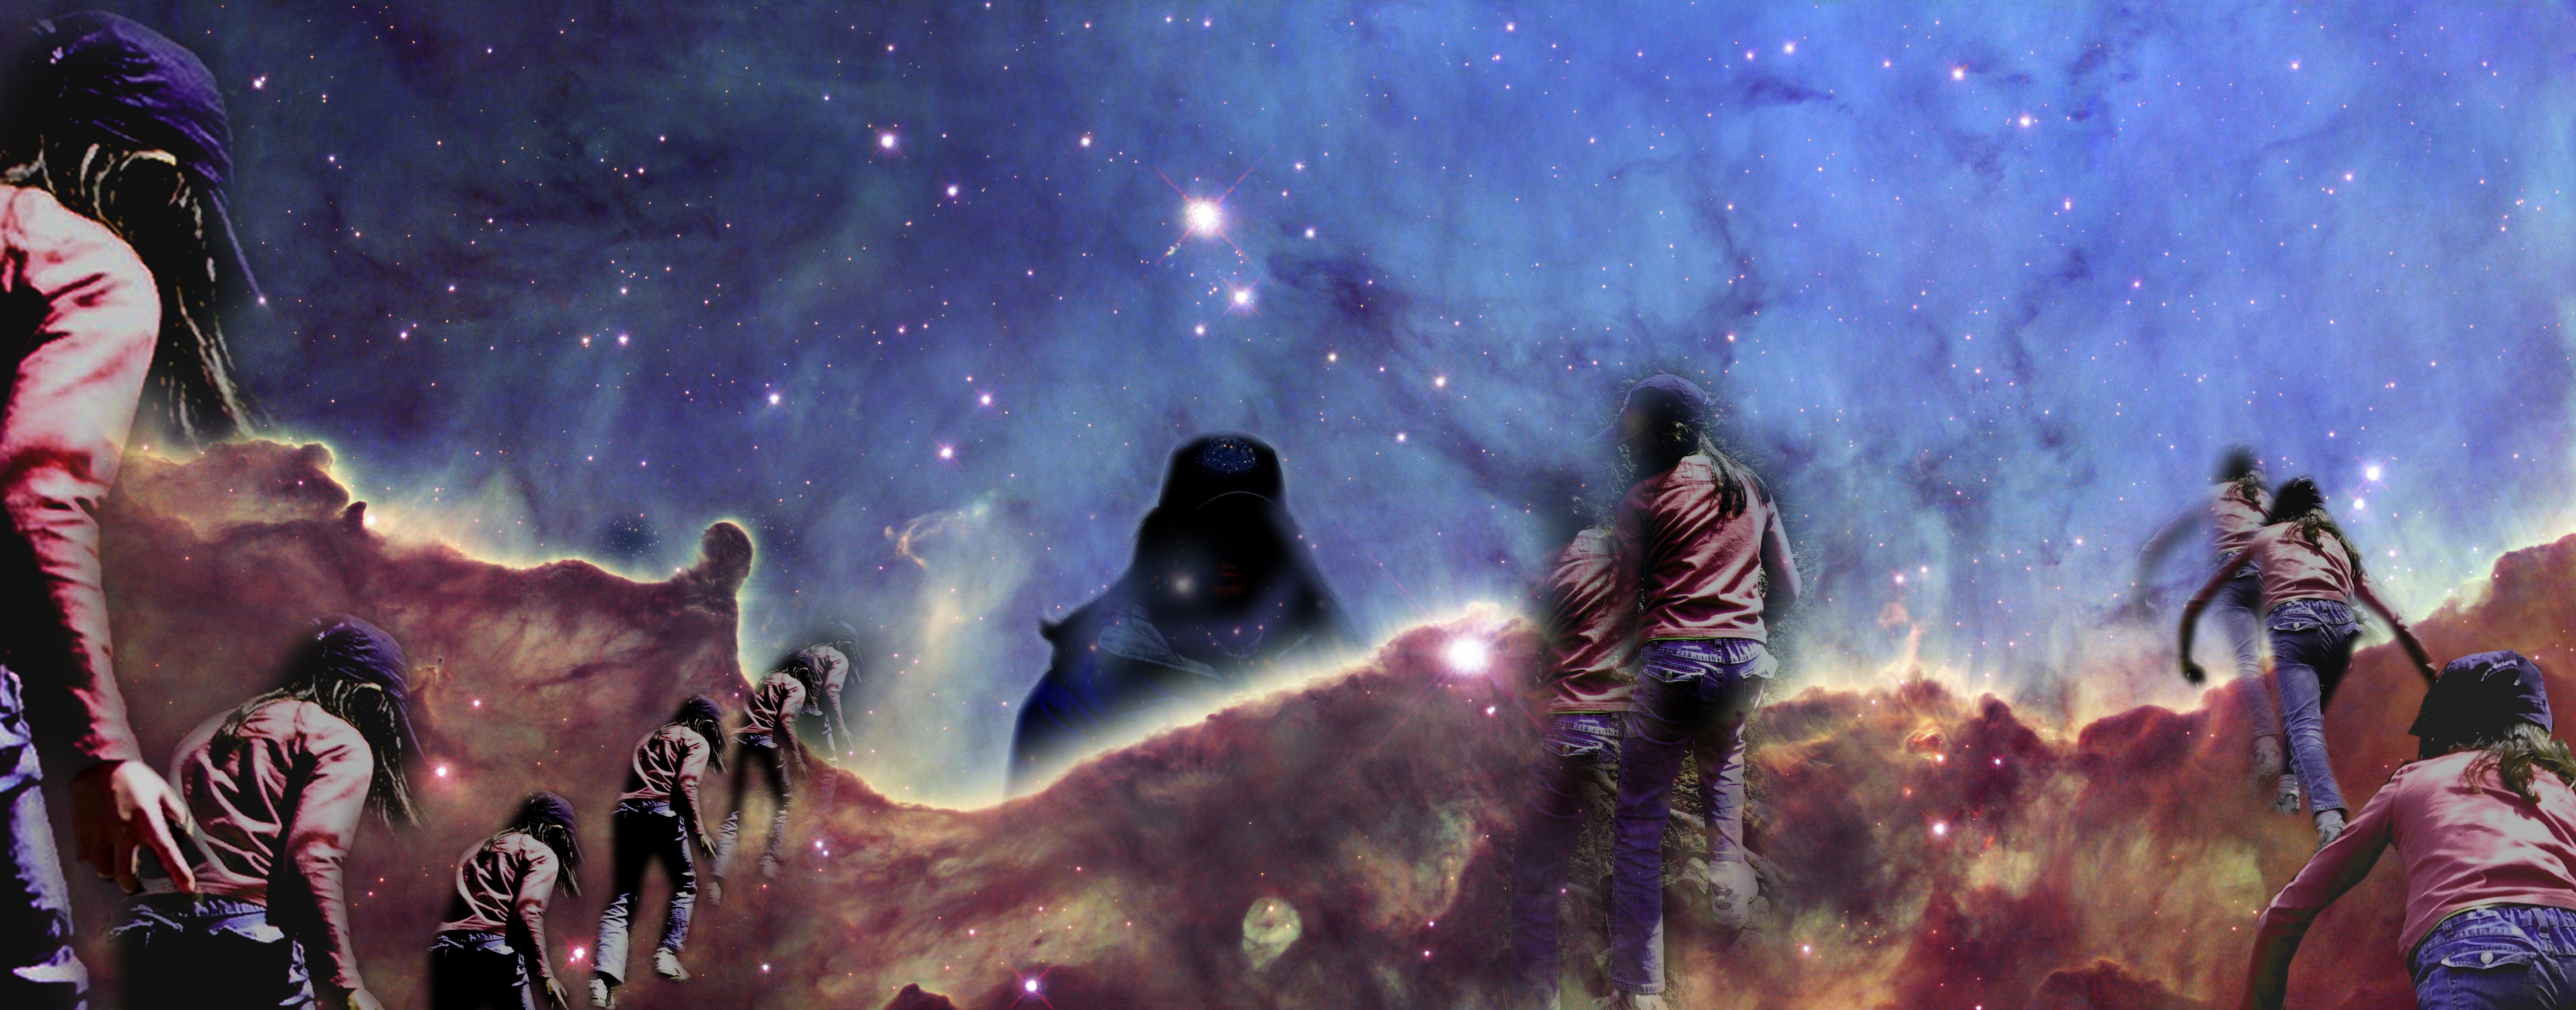 Dave Martsolf, 'Emilys Ridge Walk', 2009, original Digital Art, 84 x 33  inches. Artwork description: 6267  The background image was taken by the Hubble Space Telescope. The images of Emily were taken during a hike up a mountain in New Hampshire. The gaseous nebula reminded me of those mountains.The offered print is on canvas and will ship rolled in a tube. ...